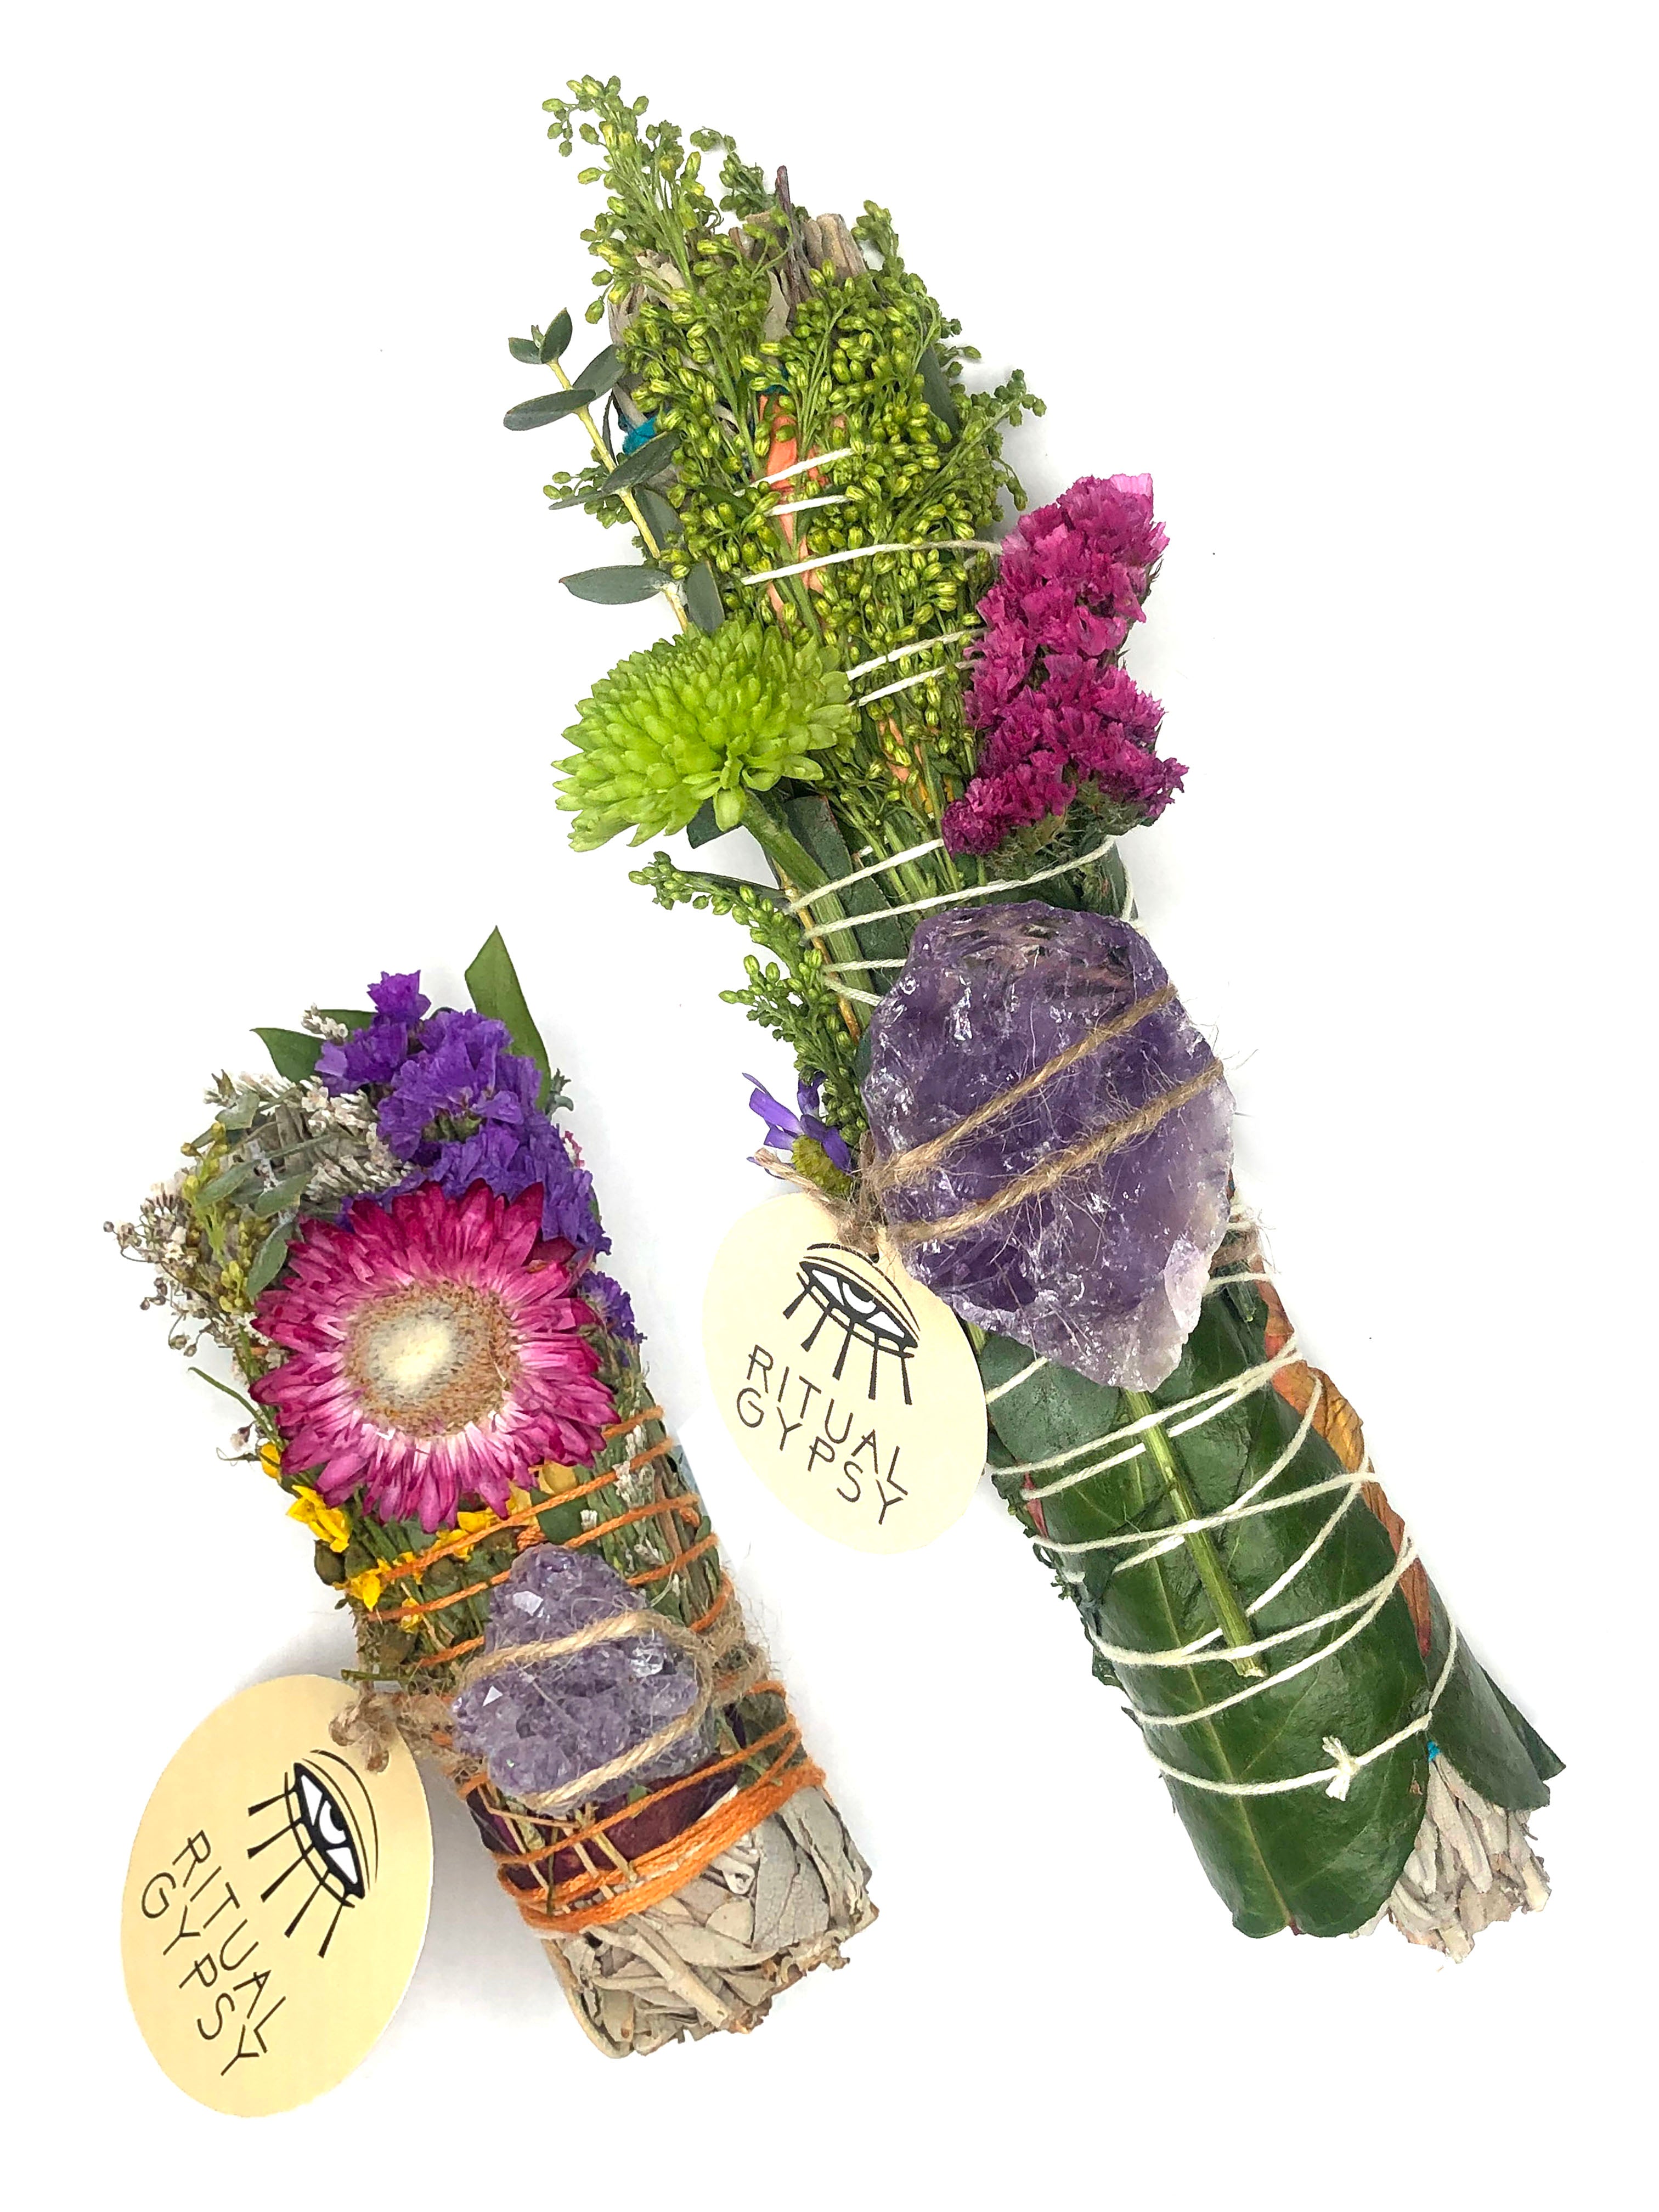 white sage smoke cleansing smudge bundles with pink and purple  statice and pink strawflower wrapped in florals with amethyst crystal and round product tag saying ritual gypsy attached